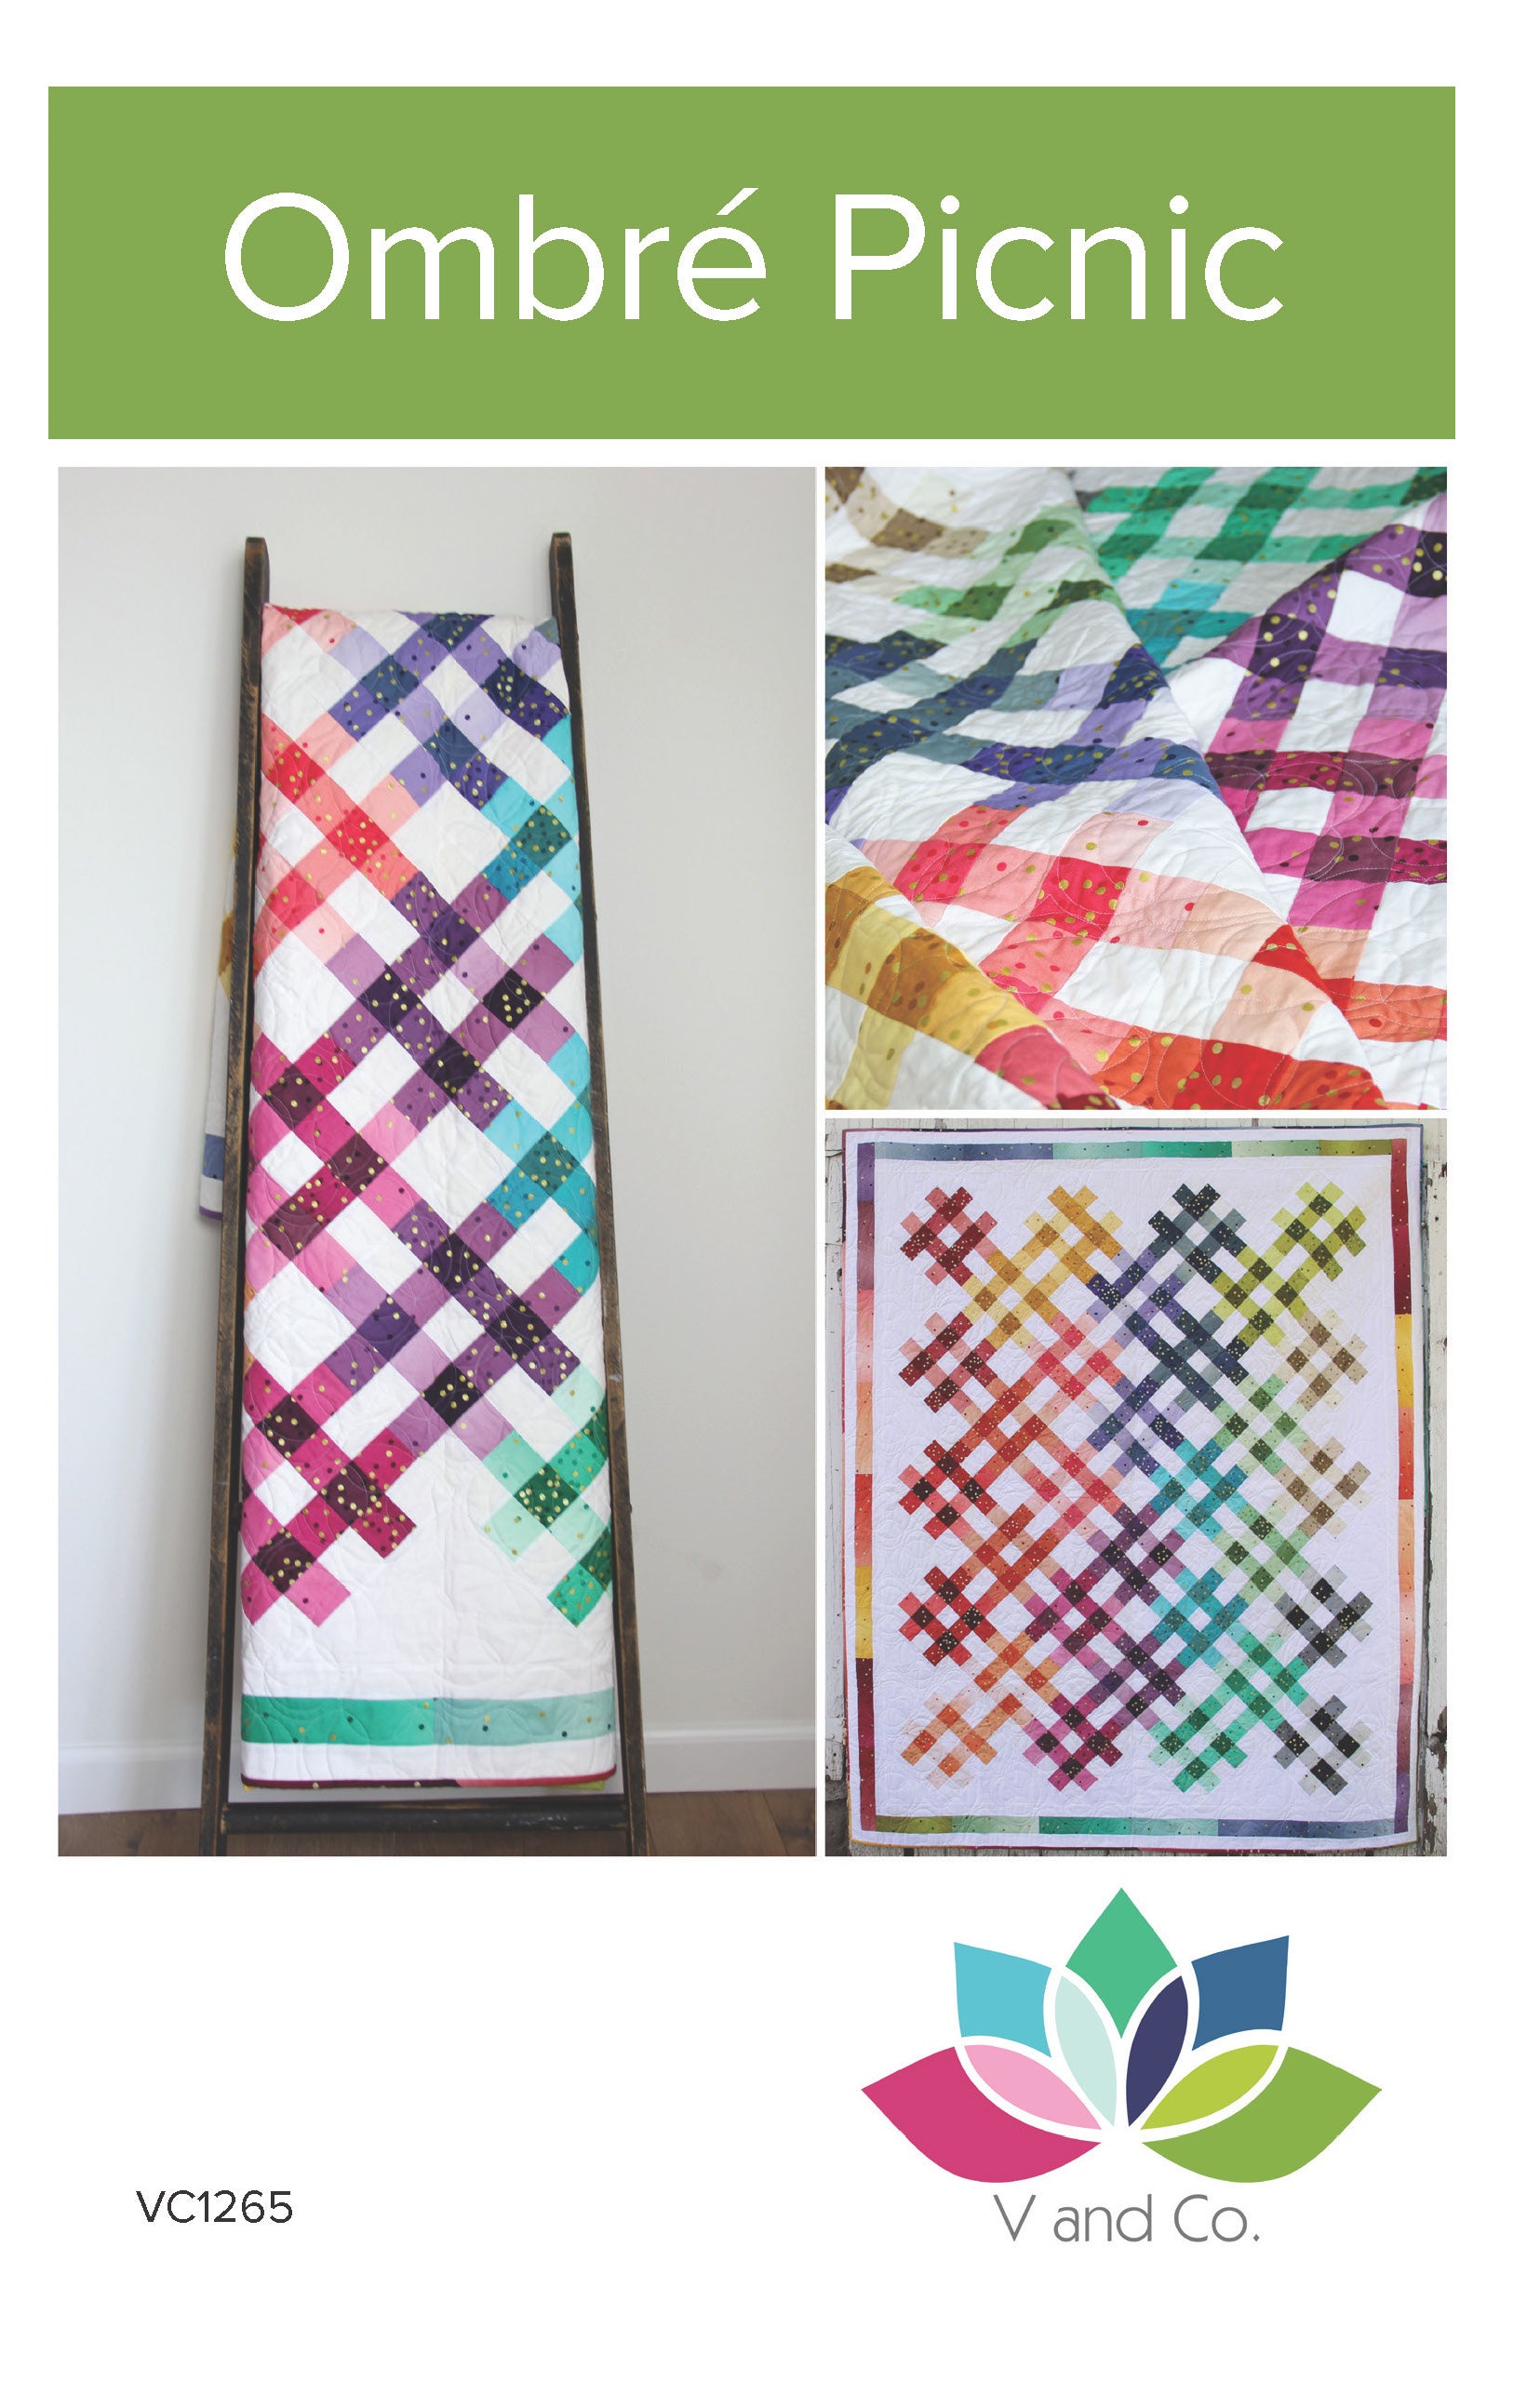 Ombre Picnic Quilt Pattern by V and Co